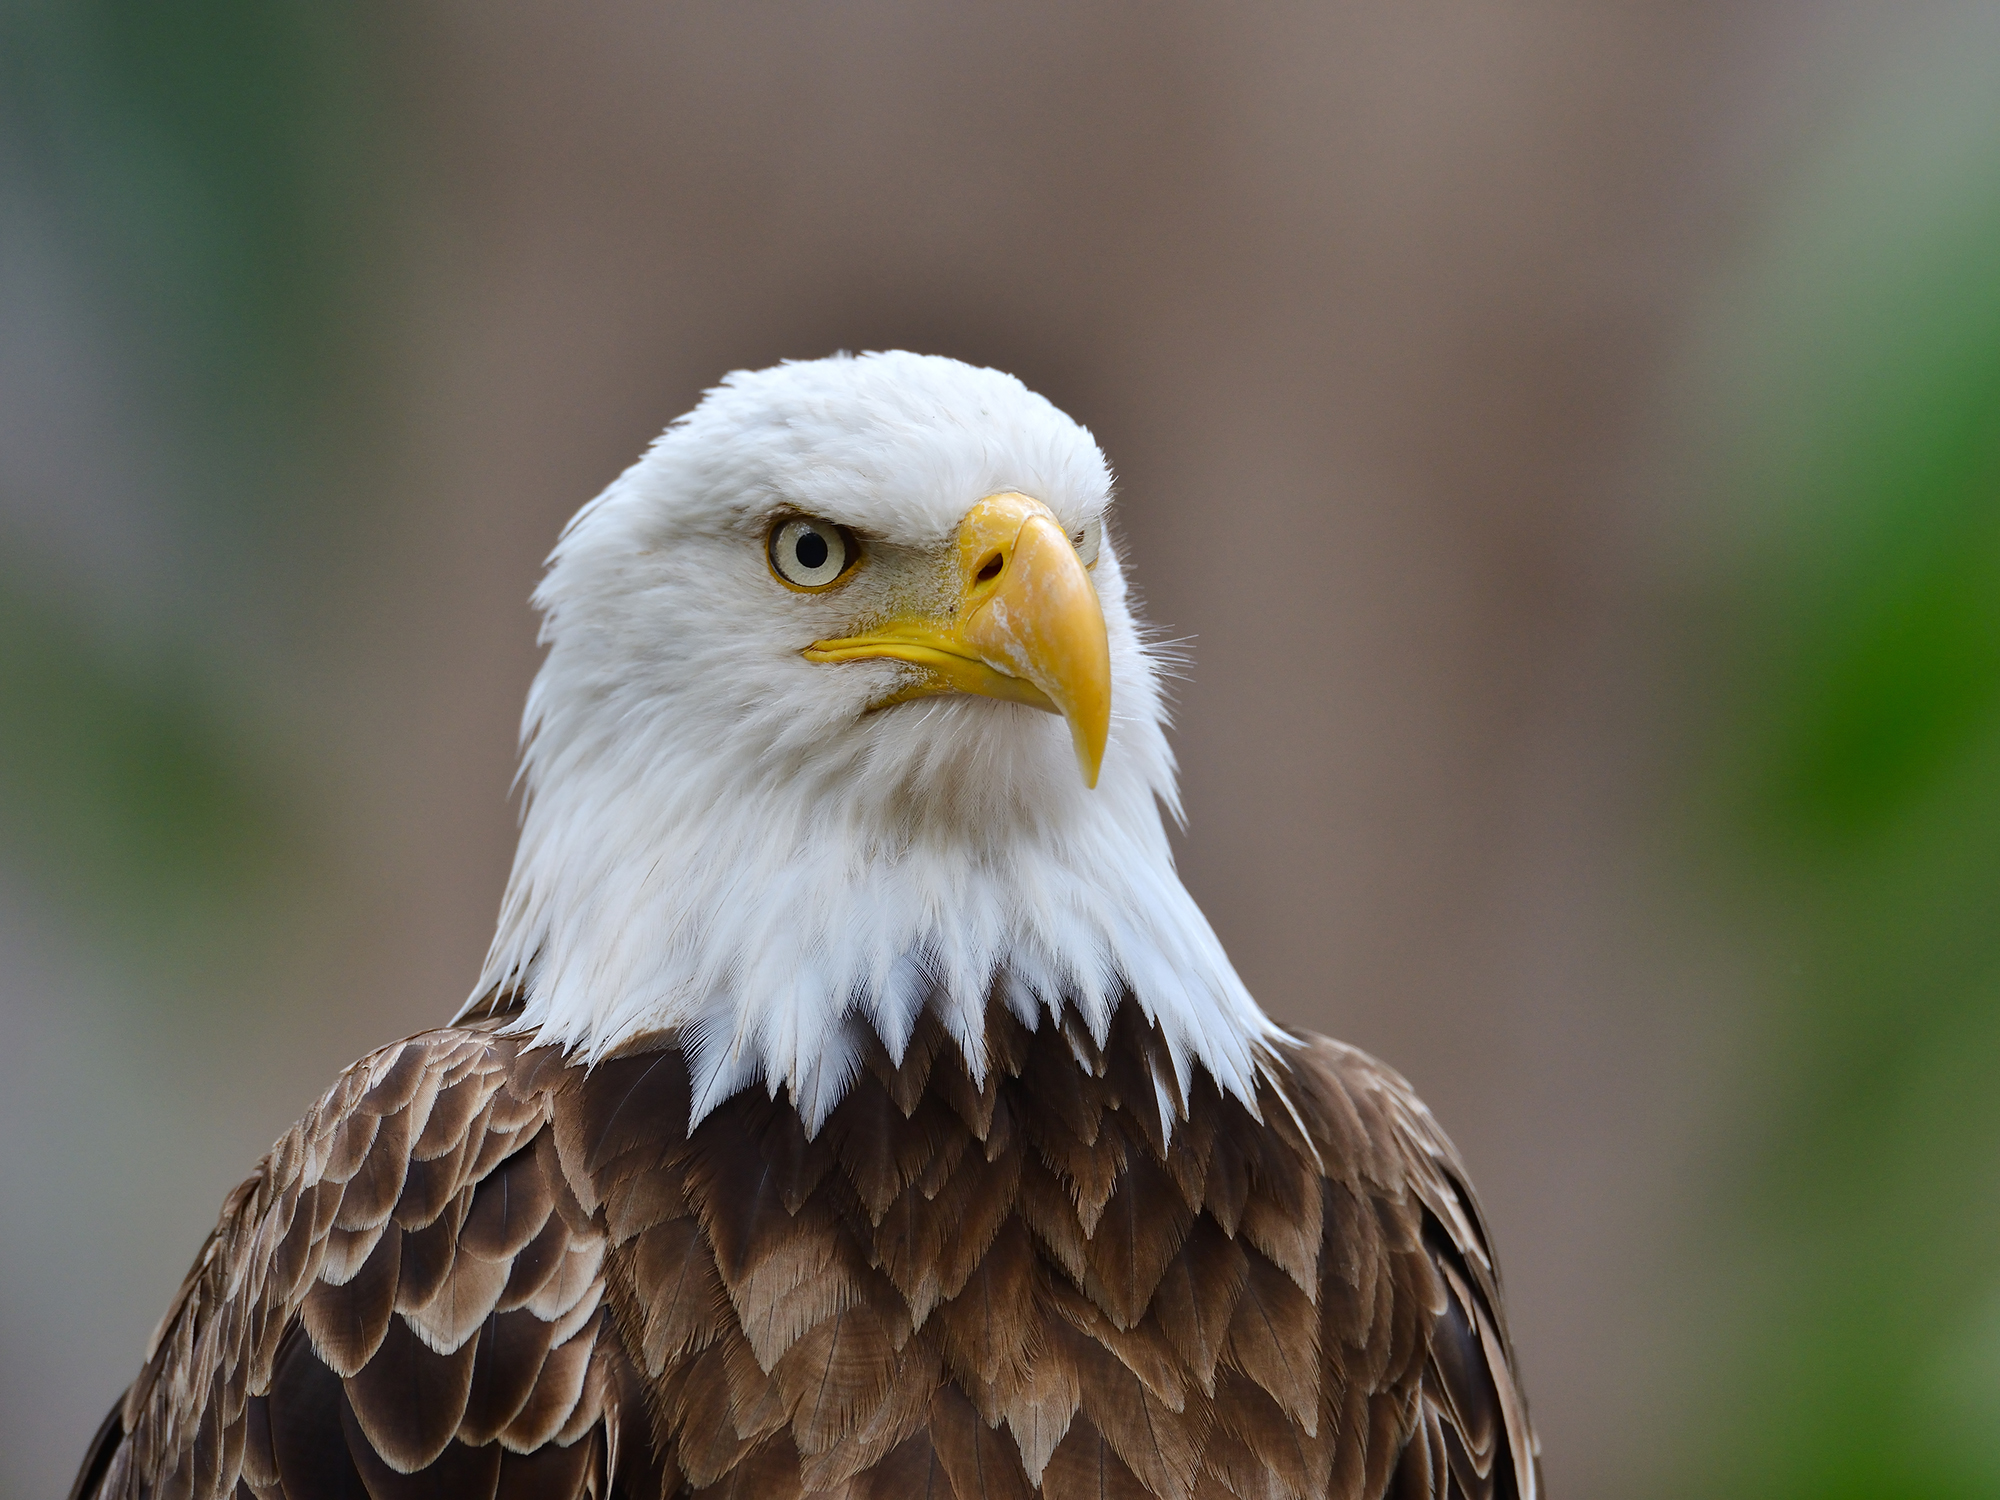 Why a wind power company pled guilty to killing 100 protected eagles